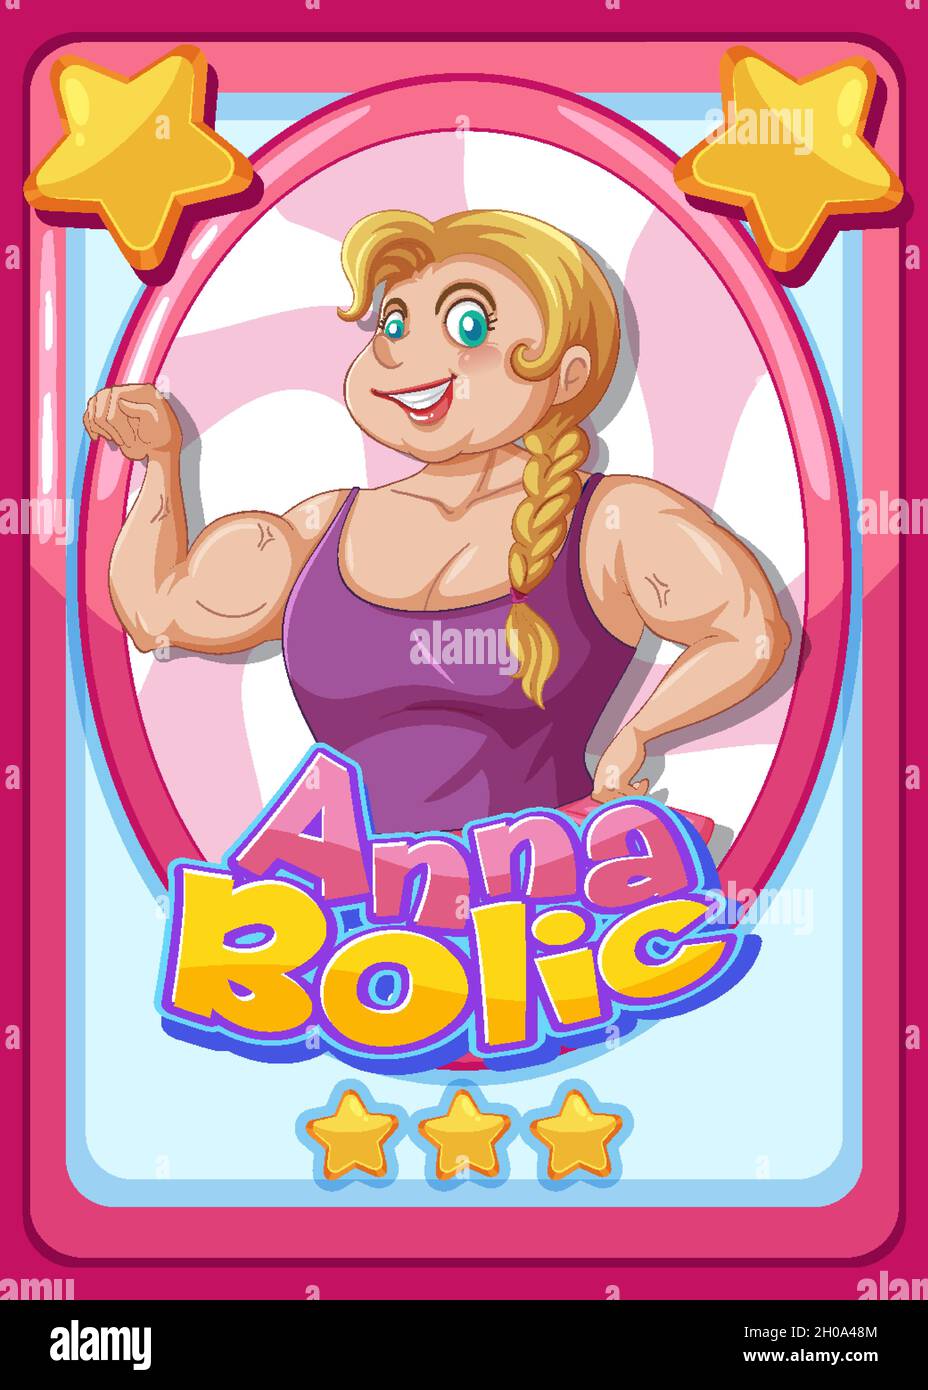 Character game card template with word Anna Bolic illustration Stock Vector